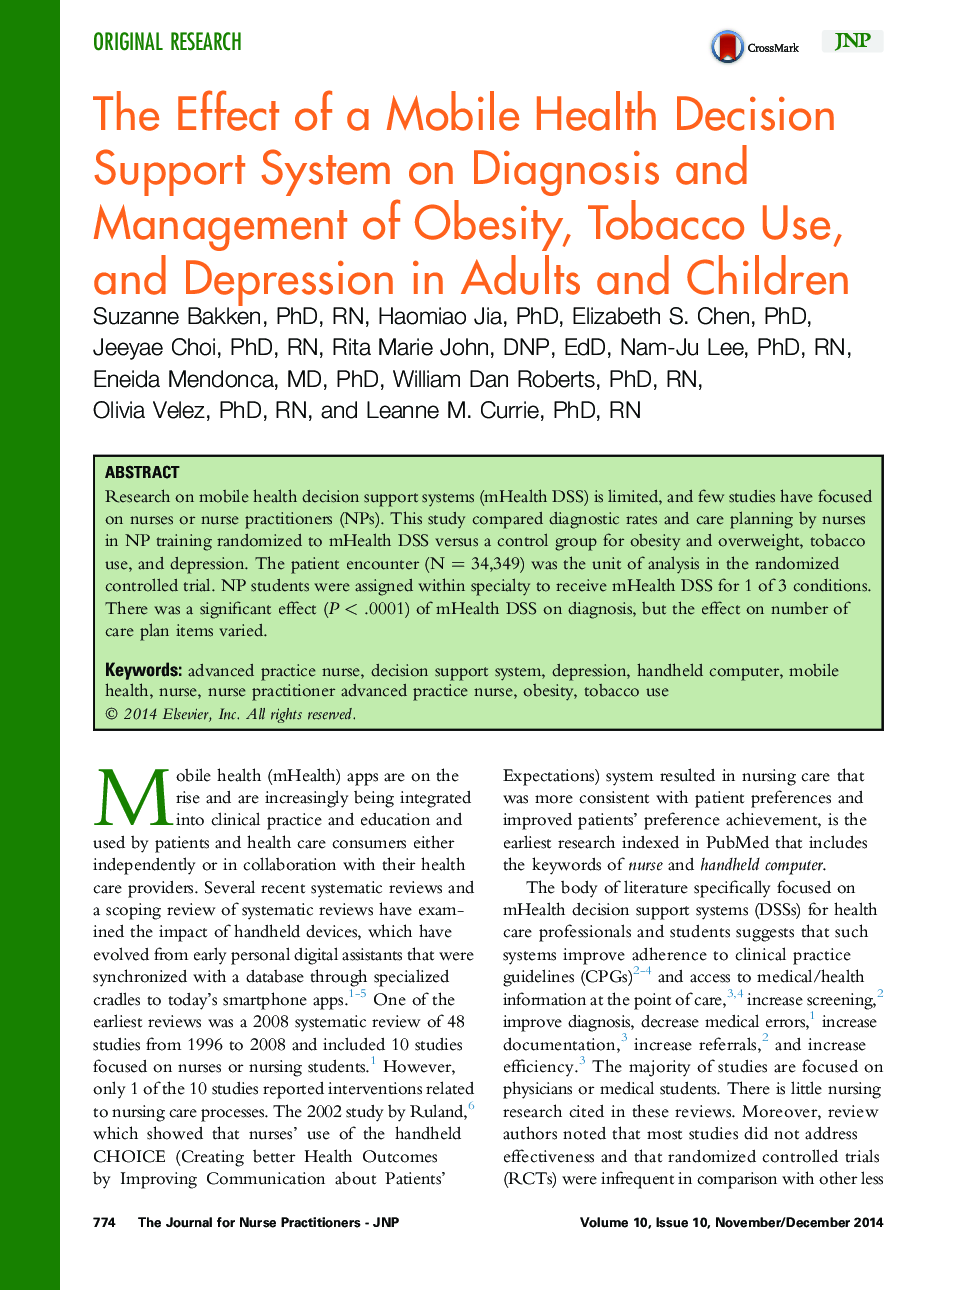 The Effect of a Mobile Health Decision Support System on Diagnosis and Management of Obesity, Tobacco Use, and Depression in Adults and Children 